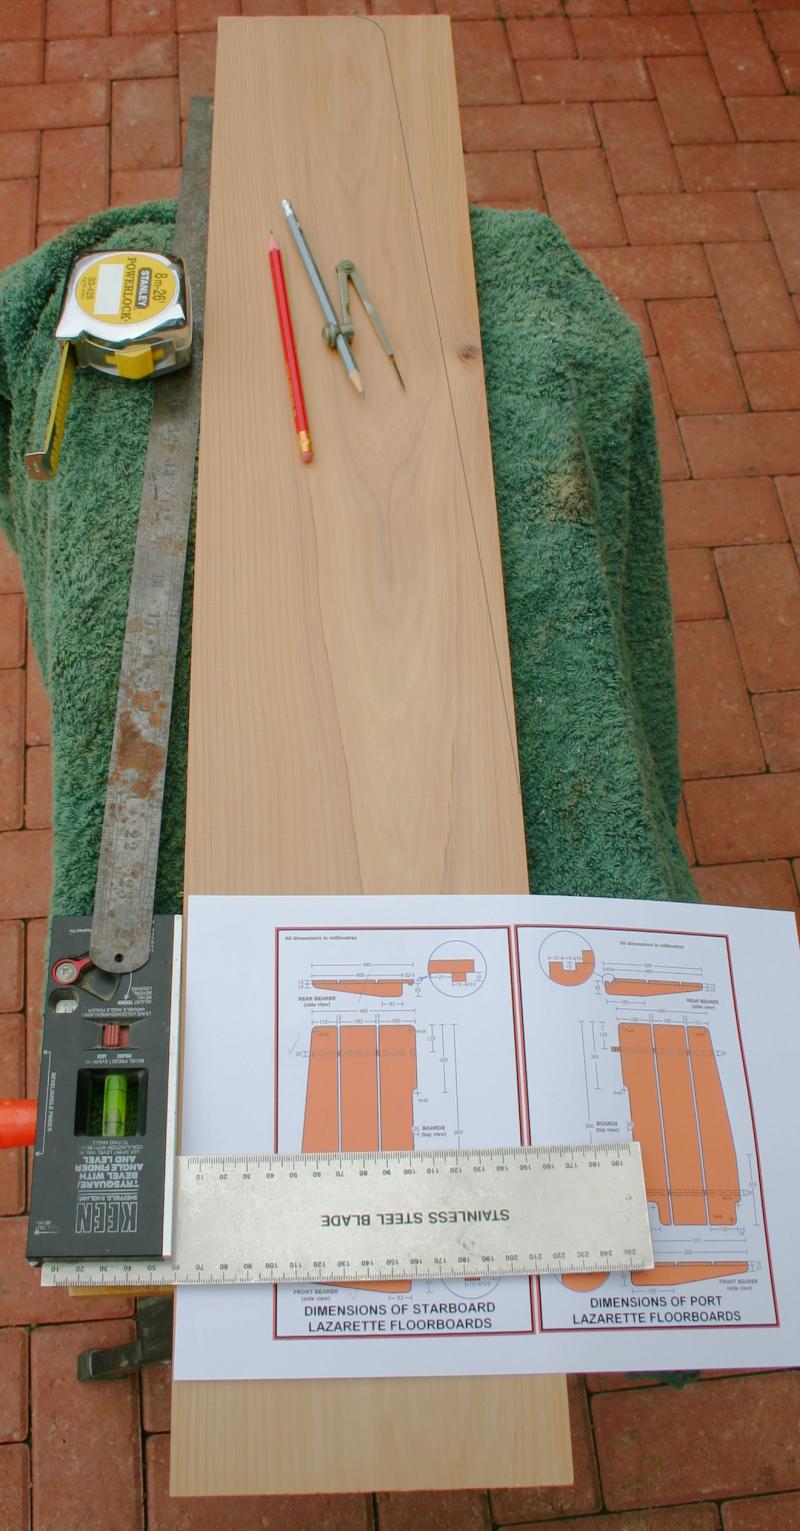 Marking prior to cutting the wood